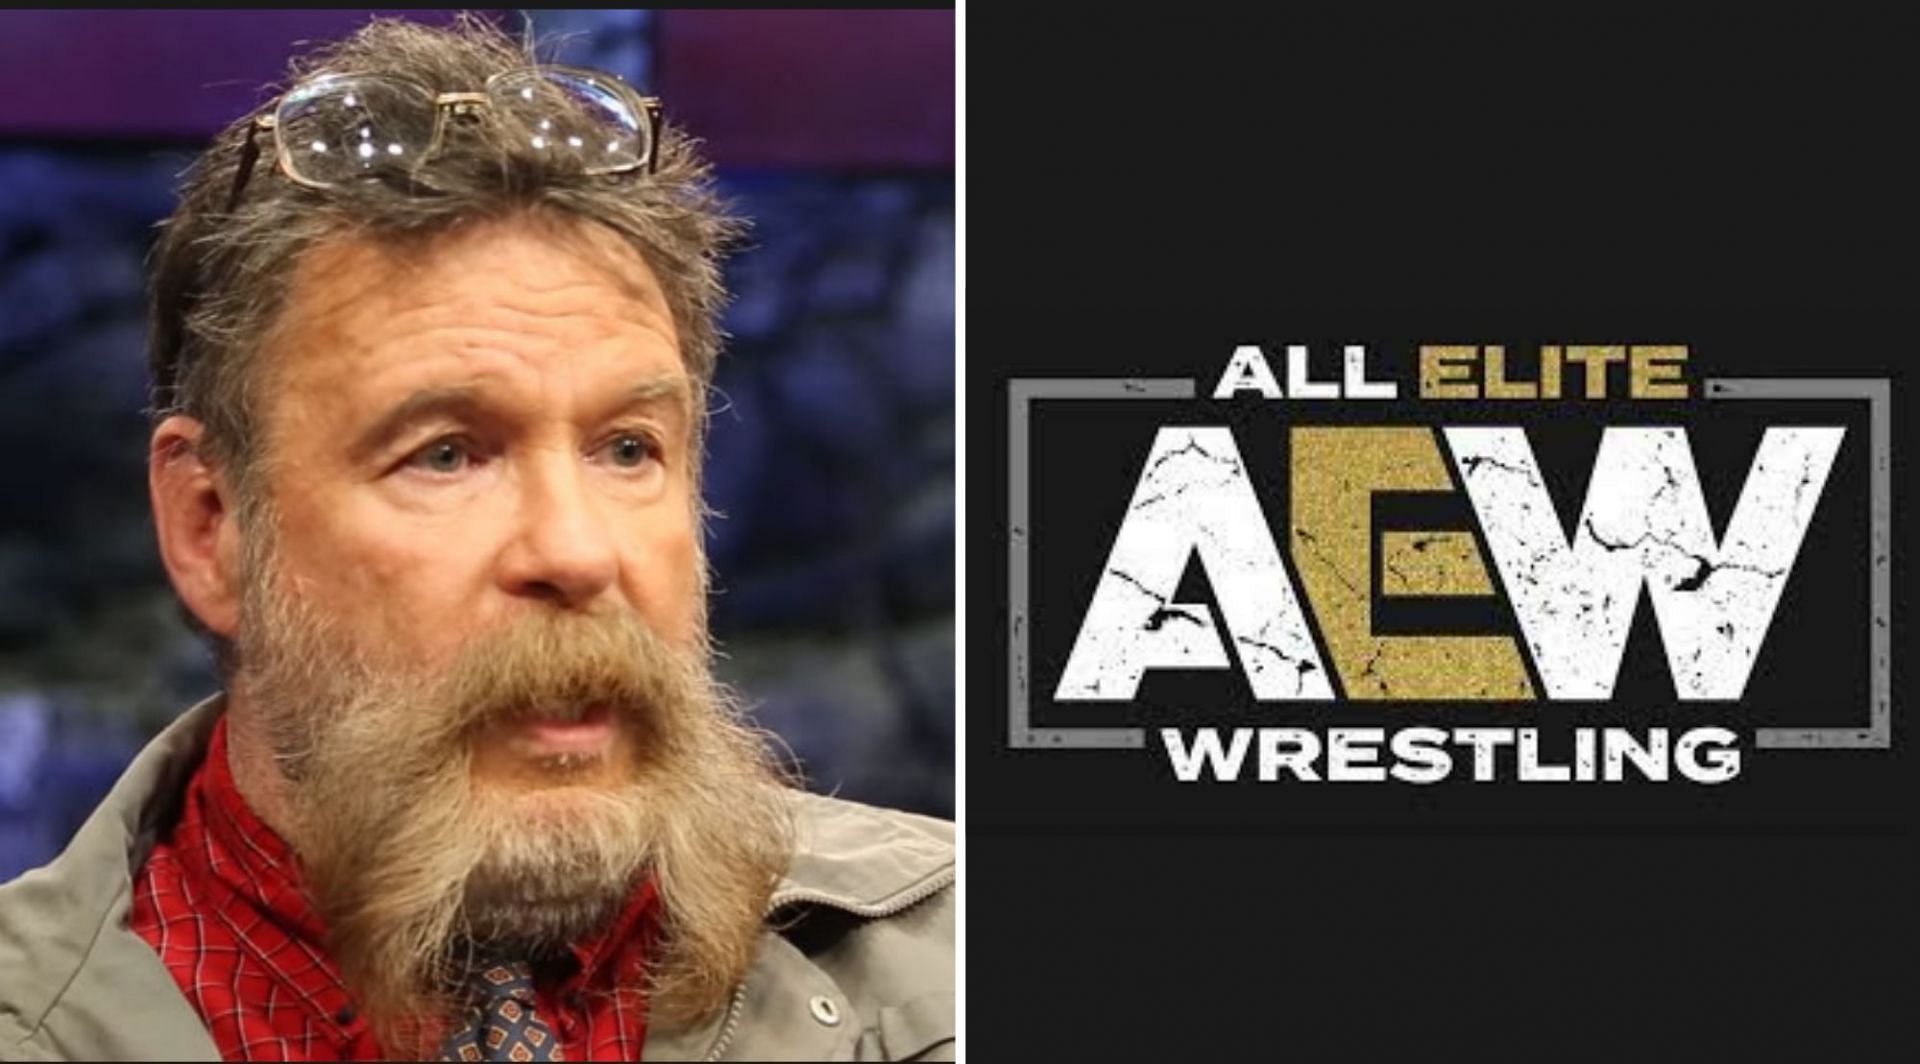 Dutch Mantell had some thoughts on this match on AEW Rampage.